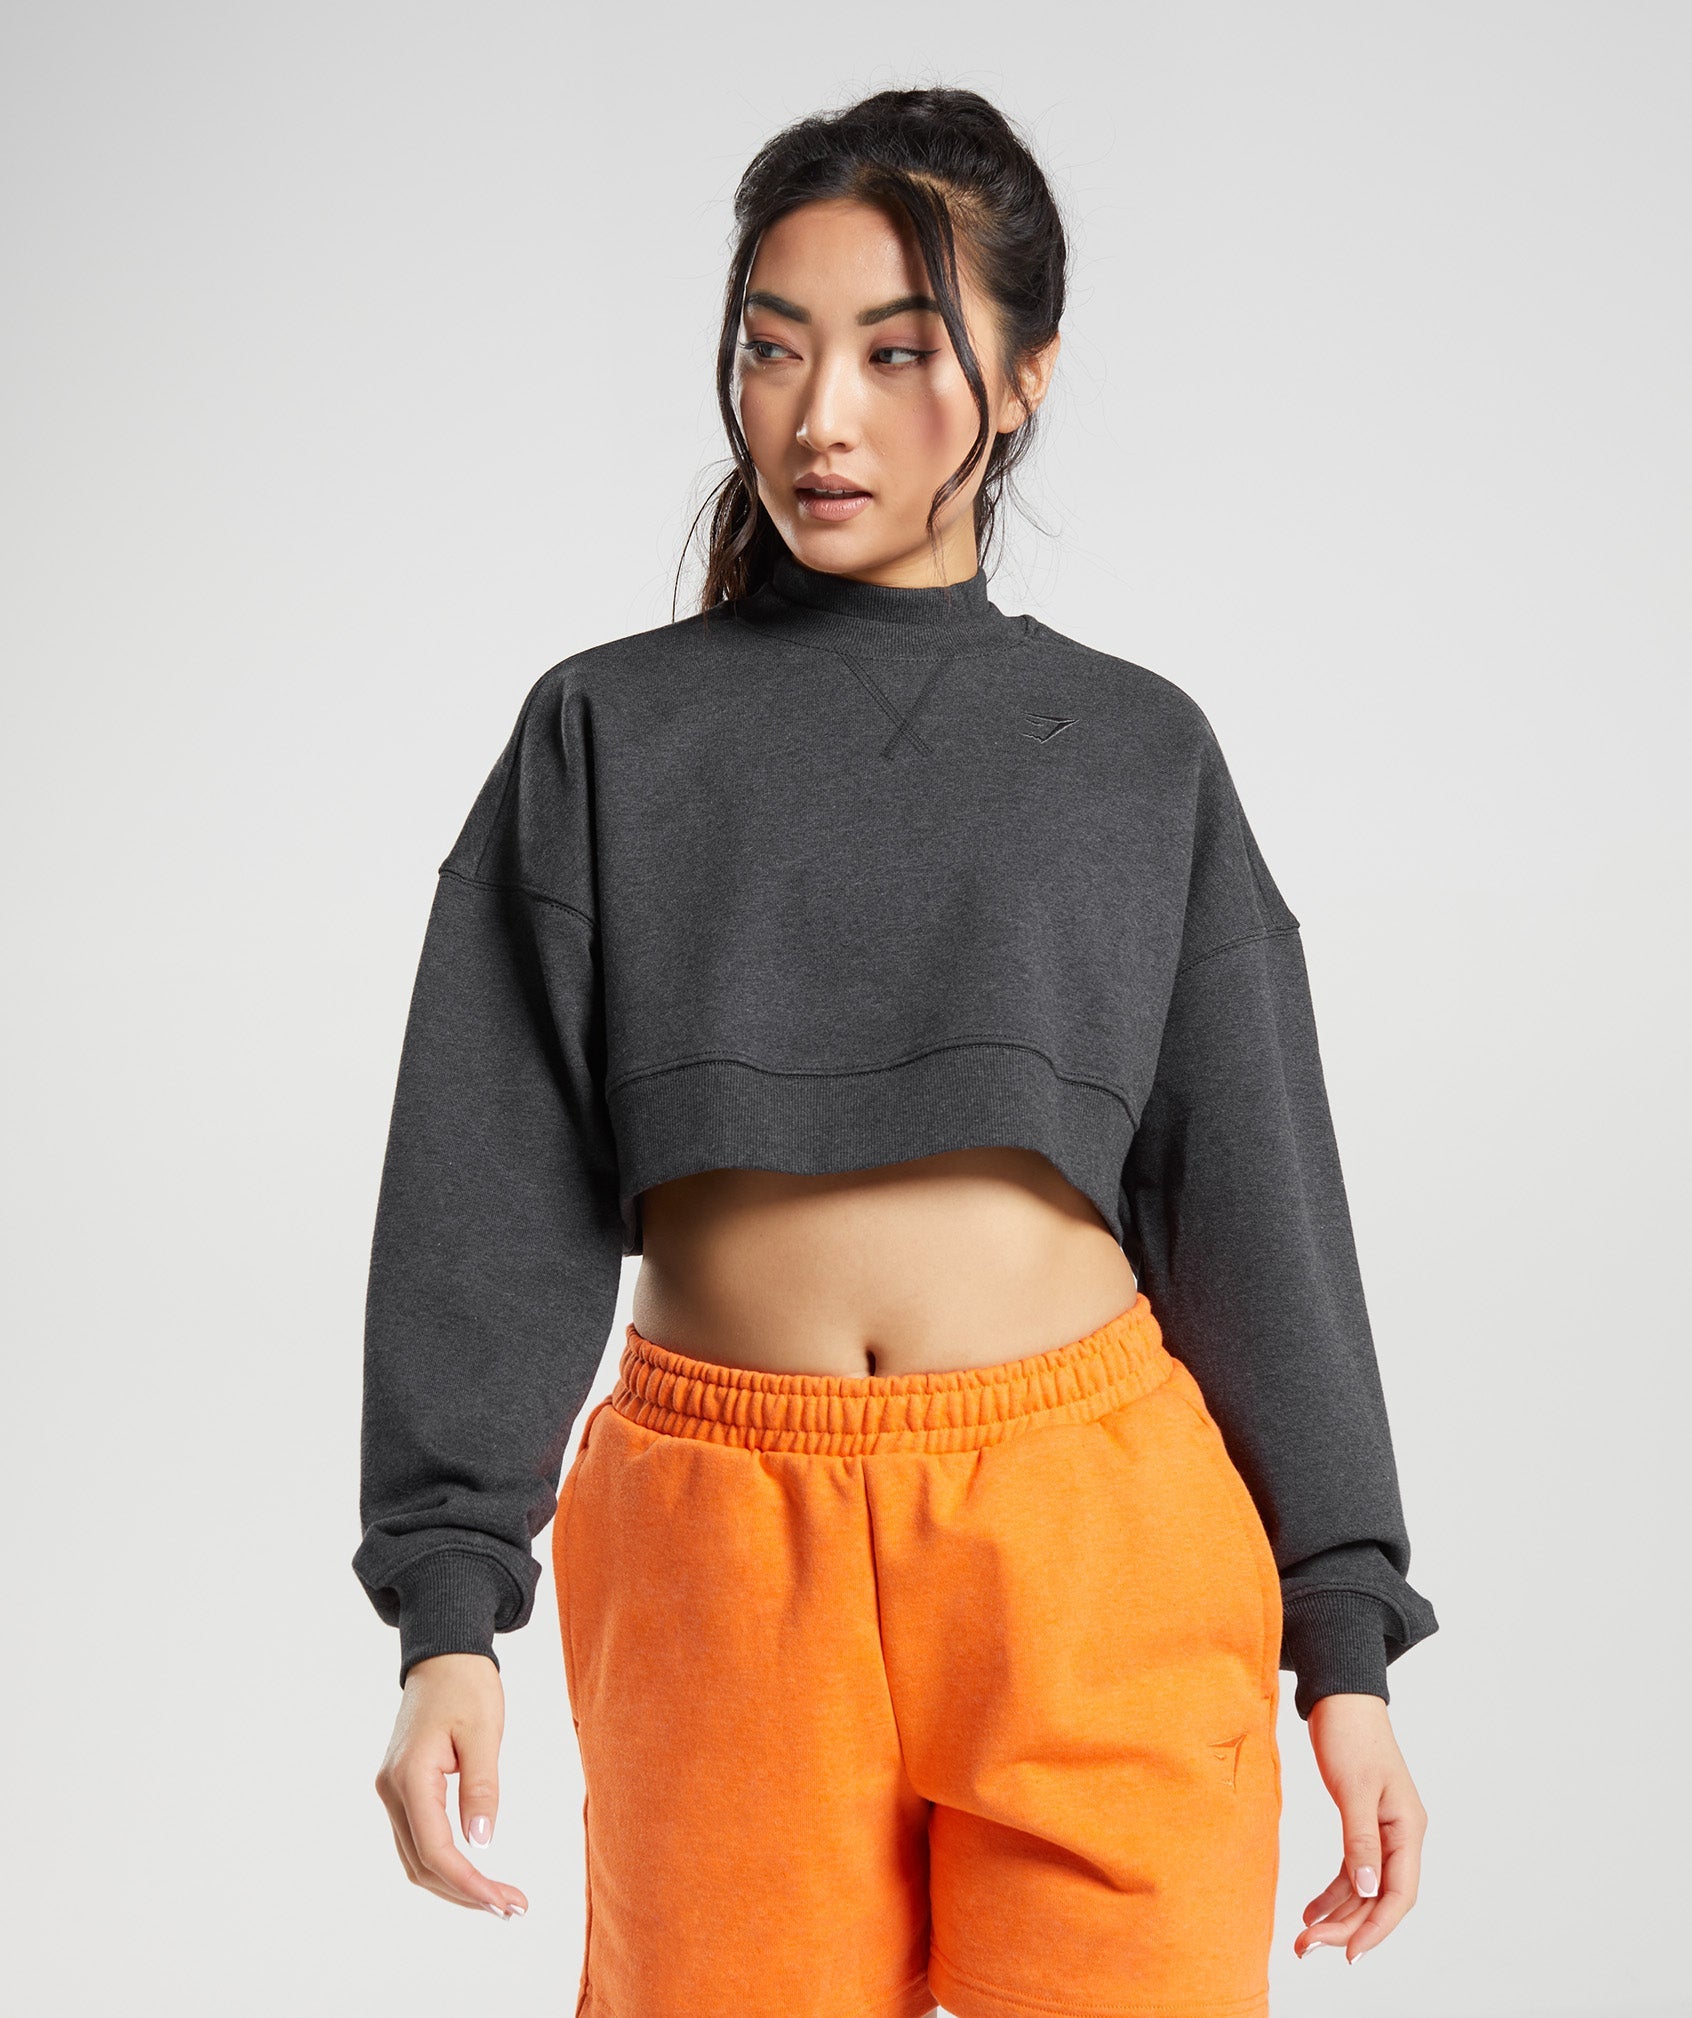 Rest Day Sweats Cropped Pullover product image 1